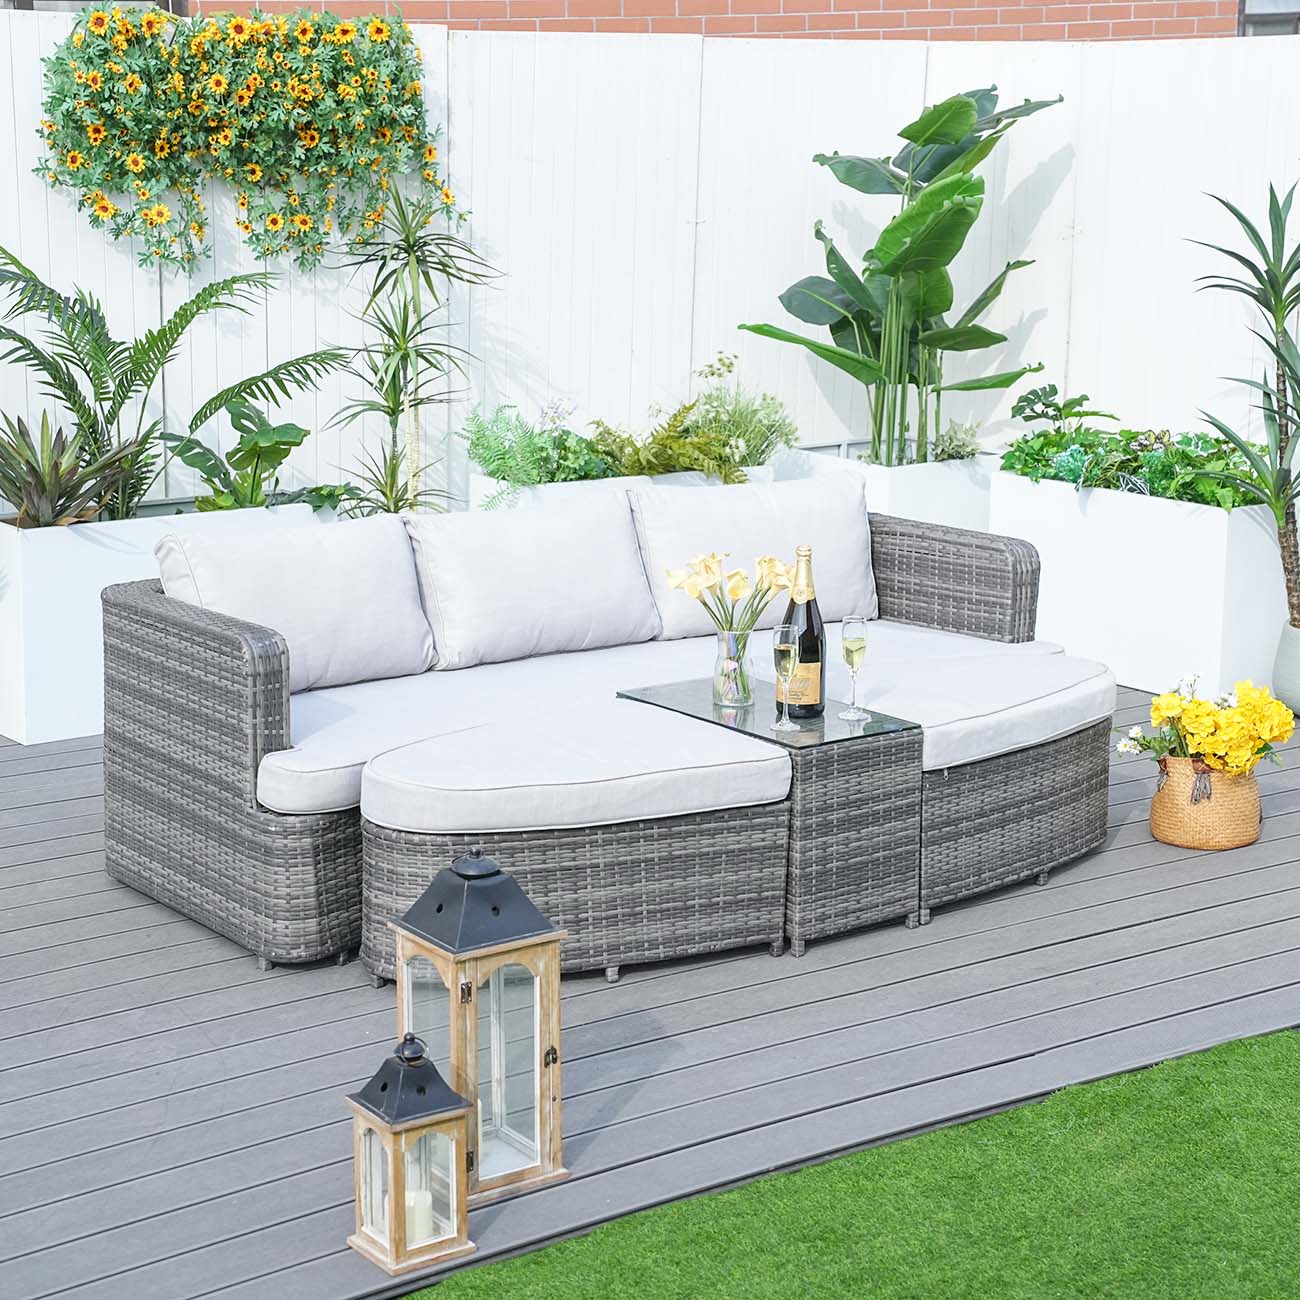 Garden Rattan Wicker Out Furniture Patio 4 Piece Deep Seating Group Daybed with Cushions - Abrihome PAL-1202